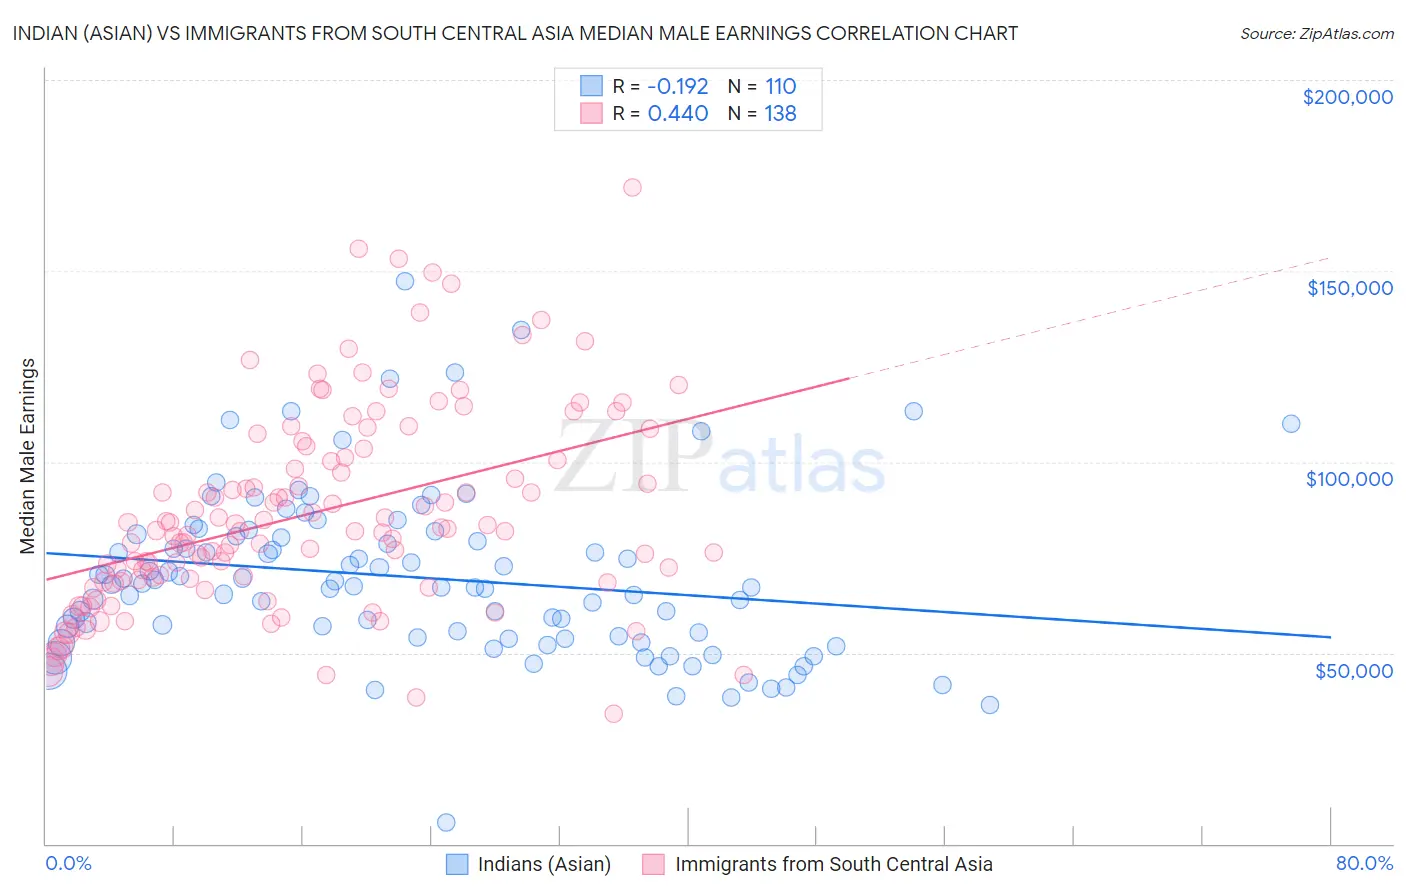 Indian (Asian) vs Immigrants from South Central Asia Median Male Earnings